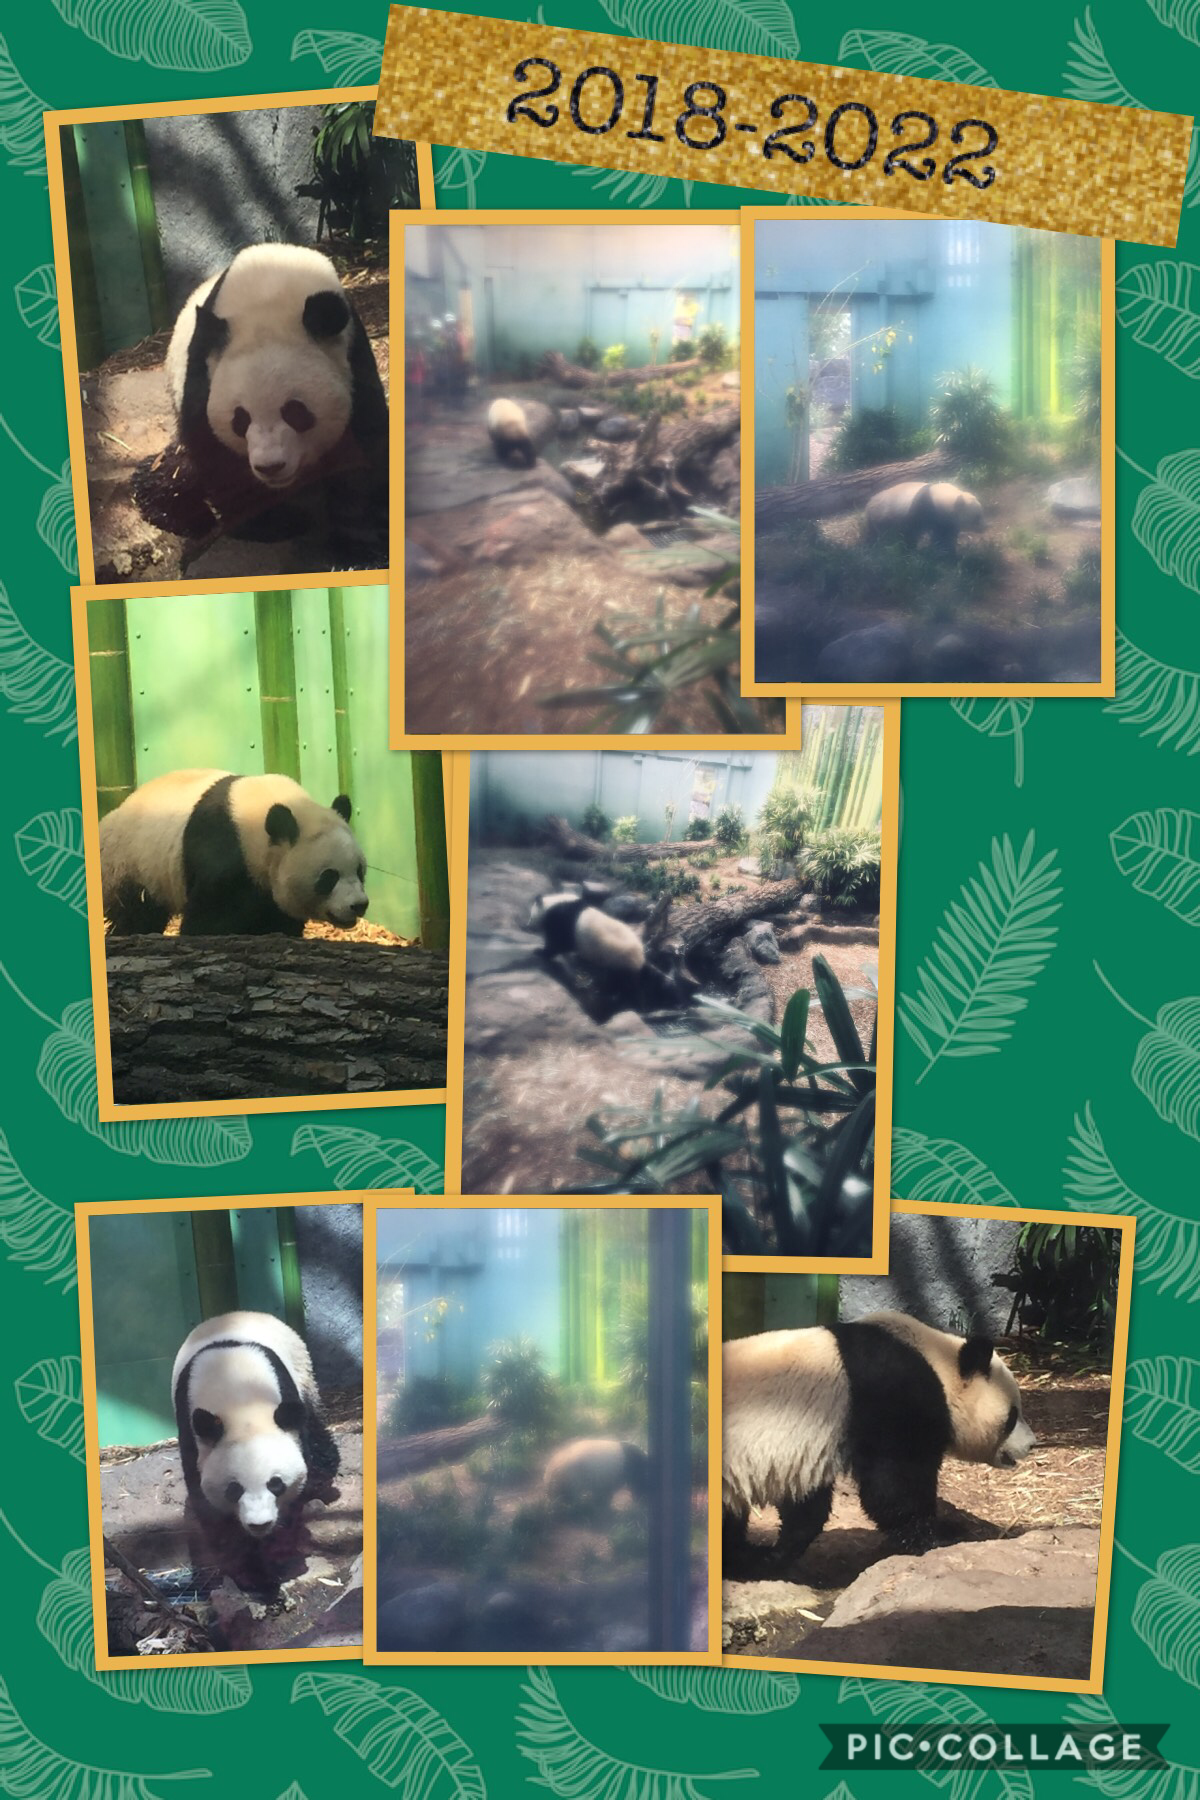 This is one of the new-ish pandas at the Calgary Zoo